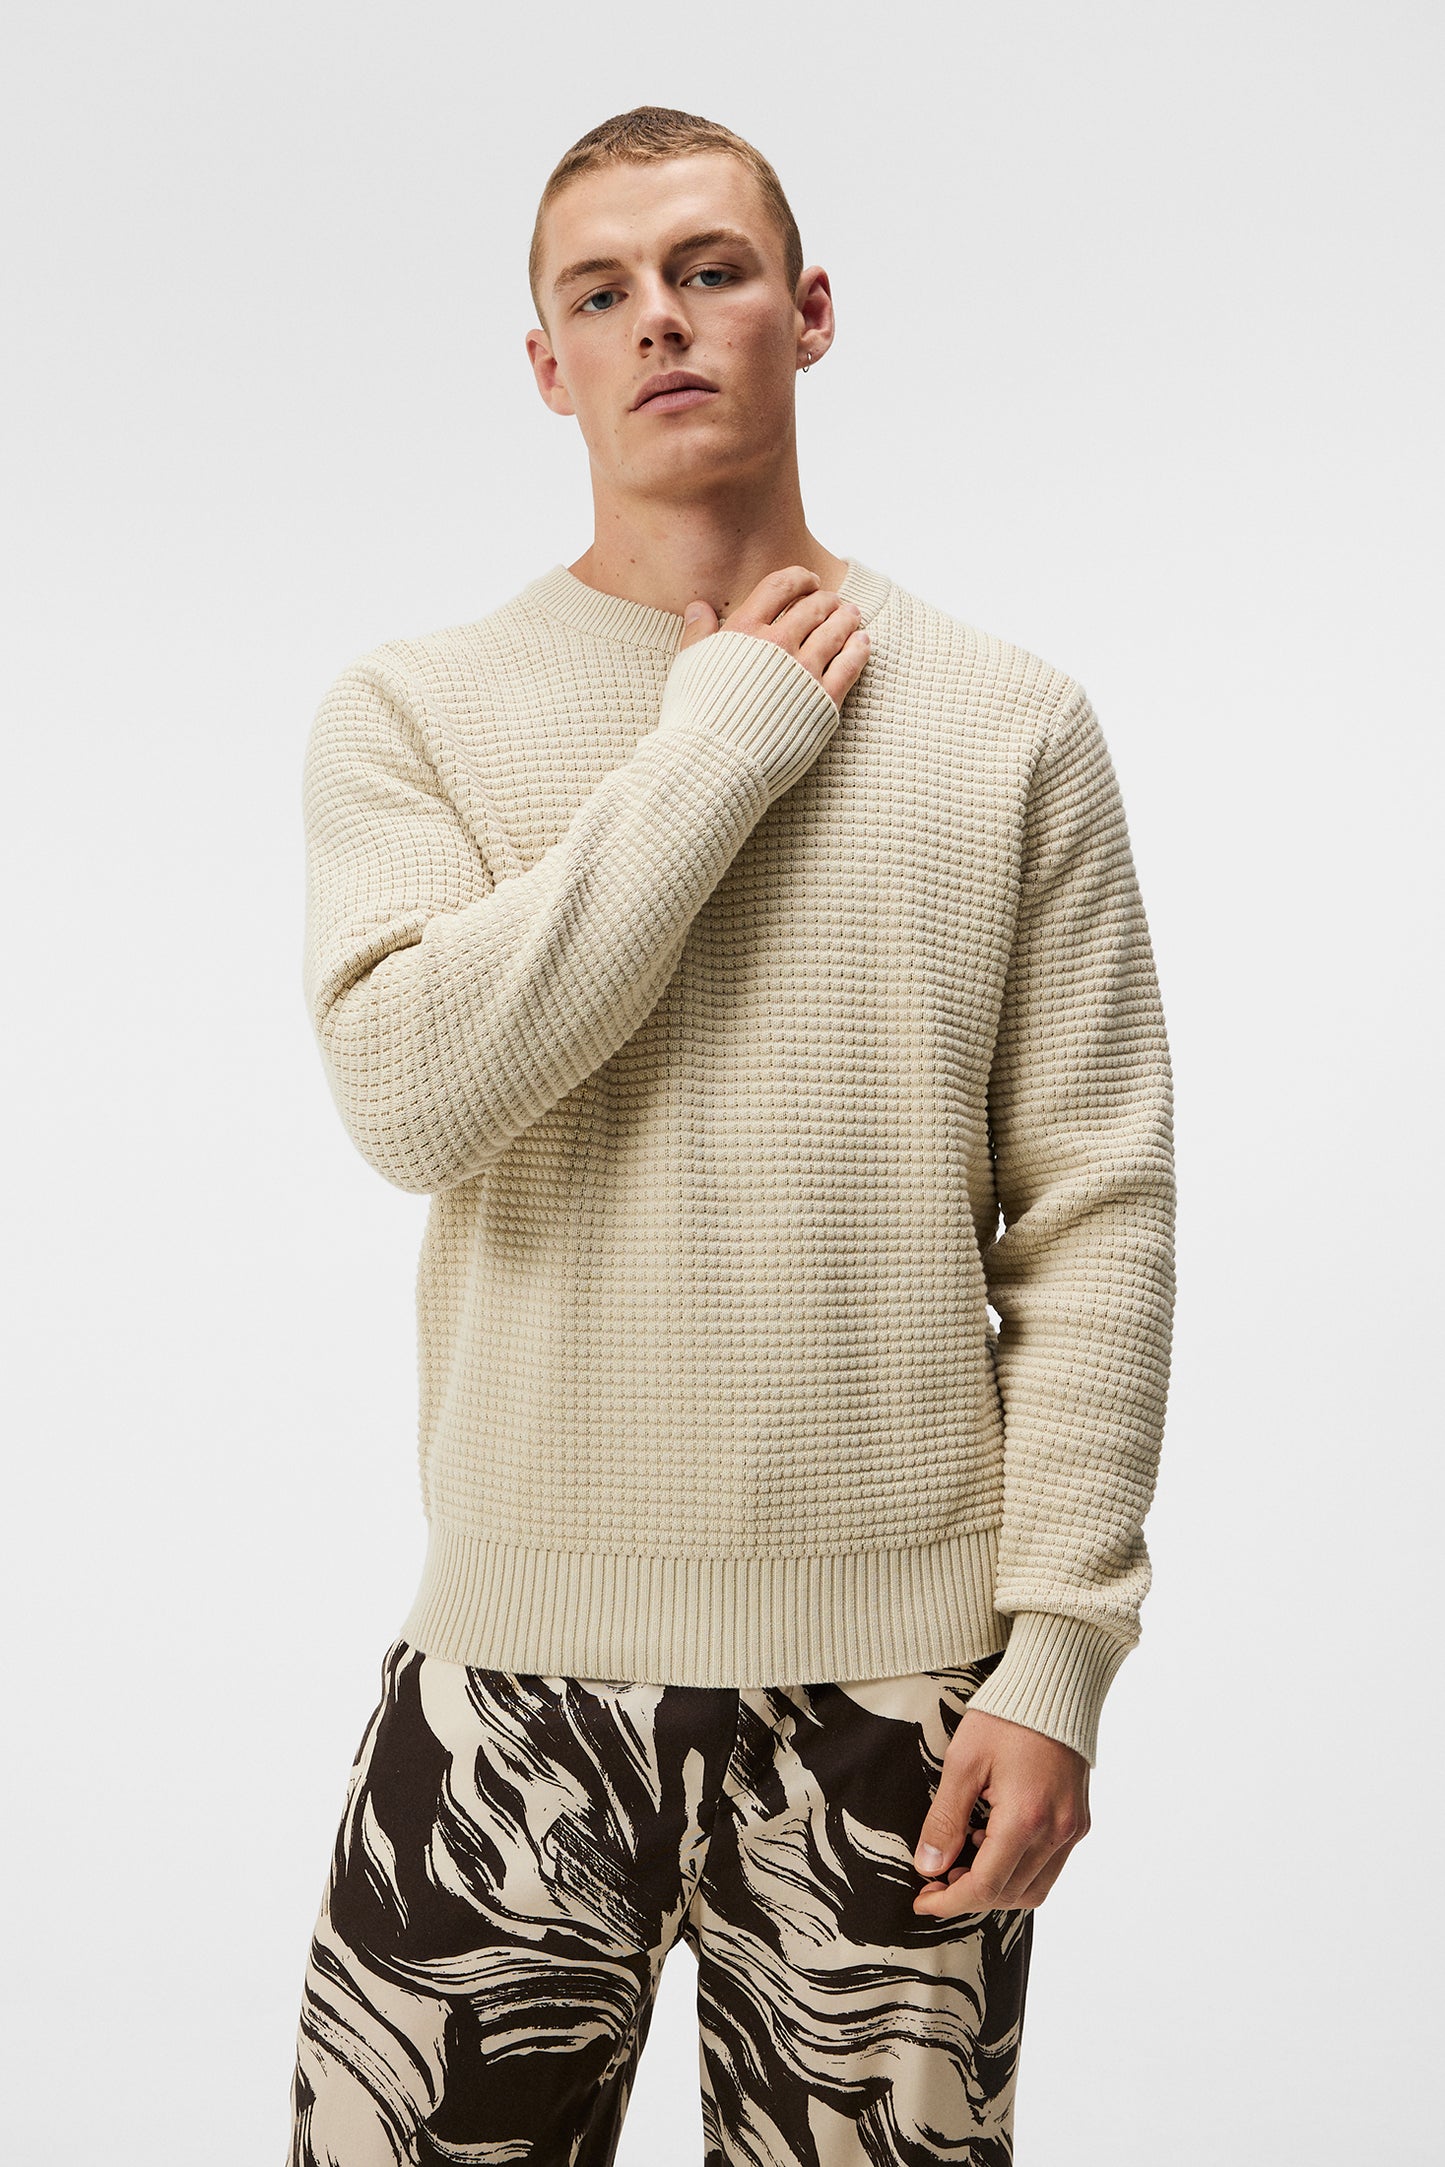 Oliver Structure Sweater / Oyster Gray – J.Lindeberg